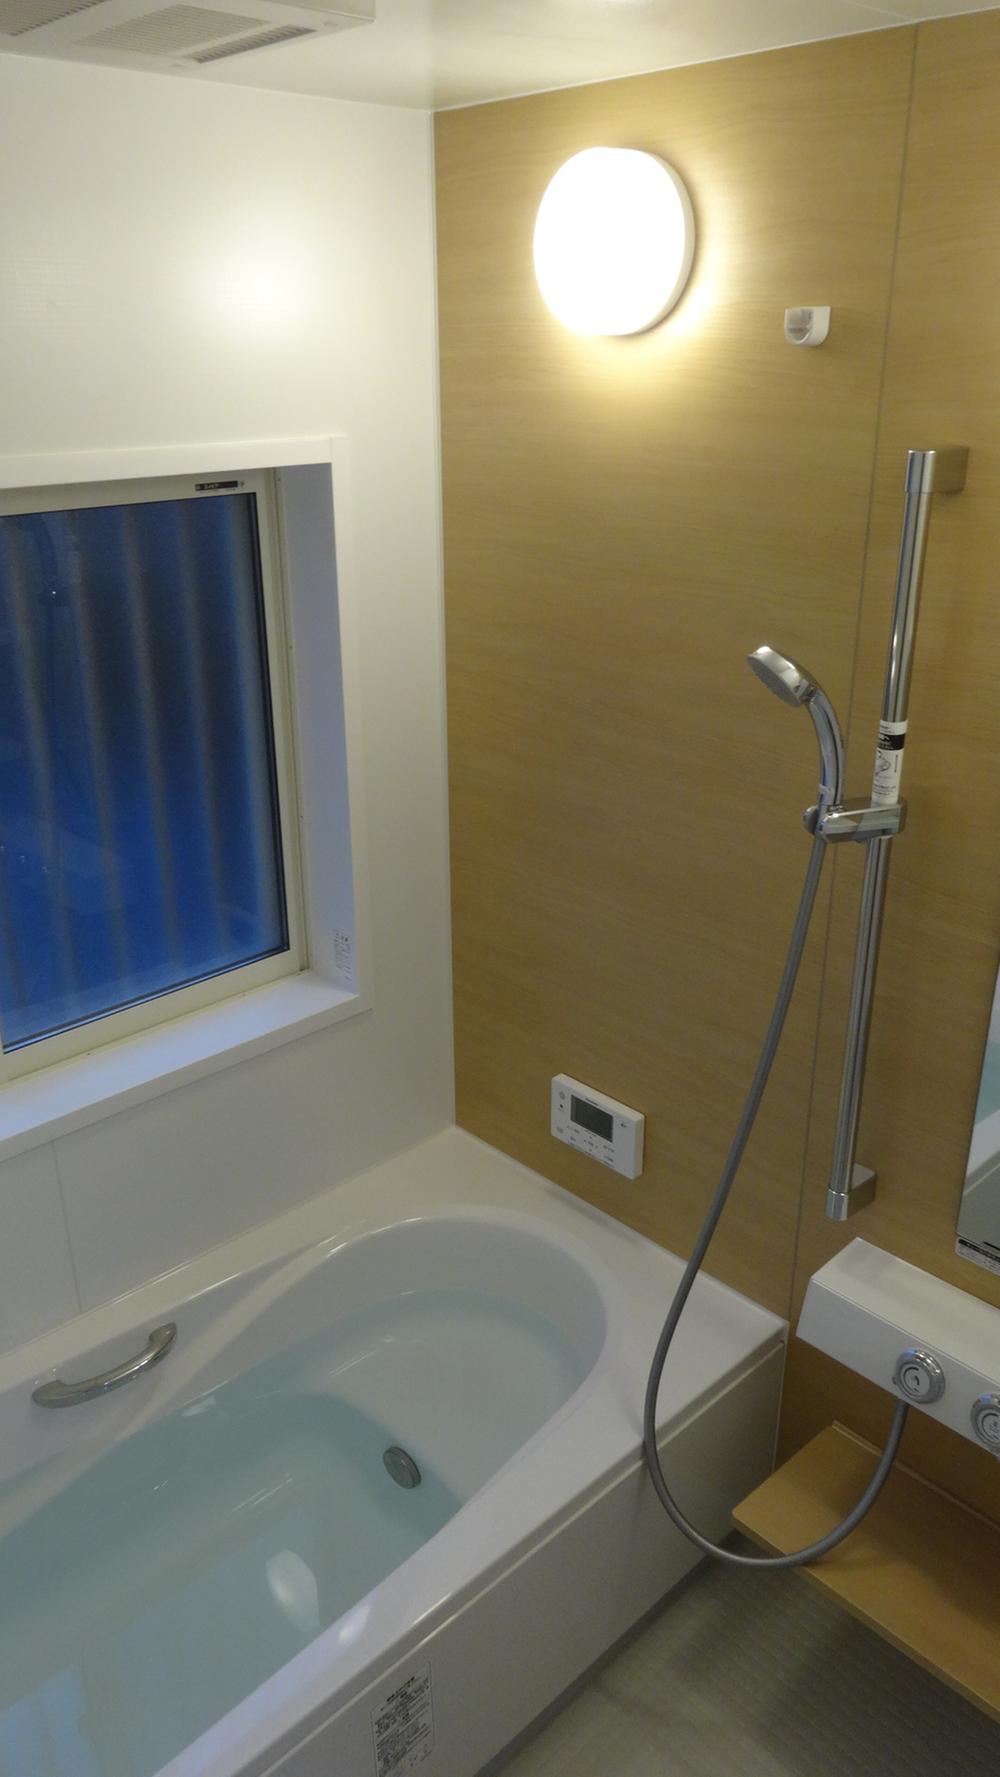 Bathroom. ventilation ・ Drying ・ heating ・ Cool breeze with thermo-floor * clean floor * push faucet * Kururin poi drainage port !!